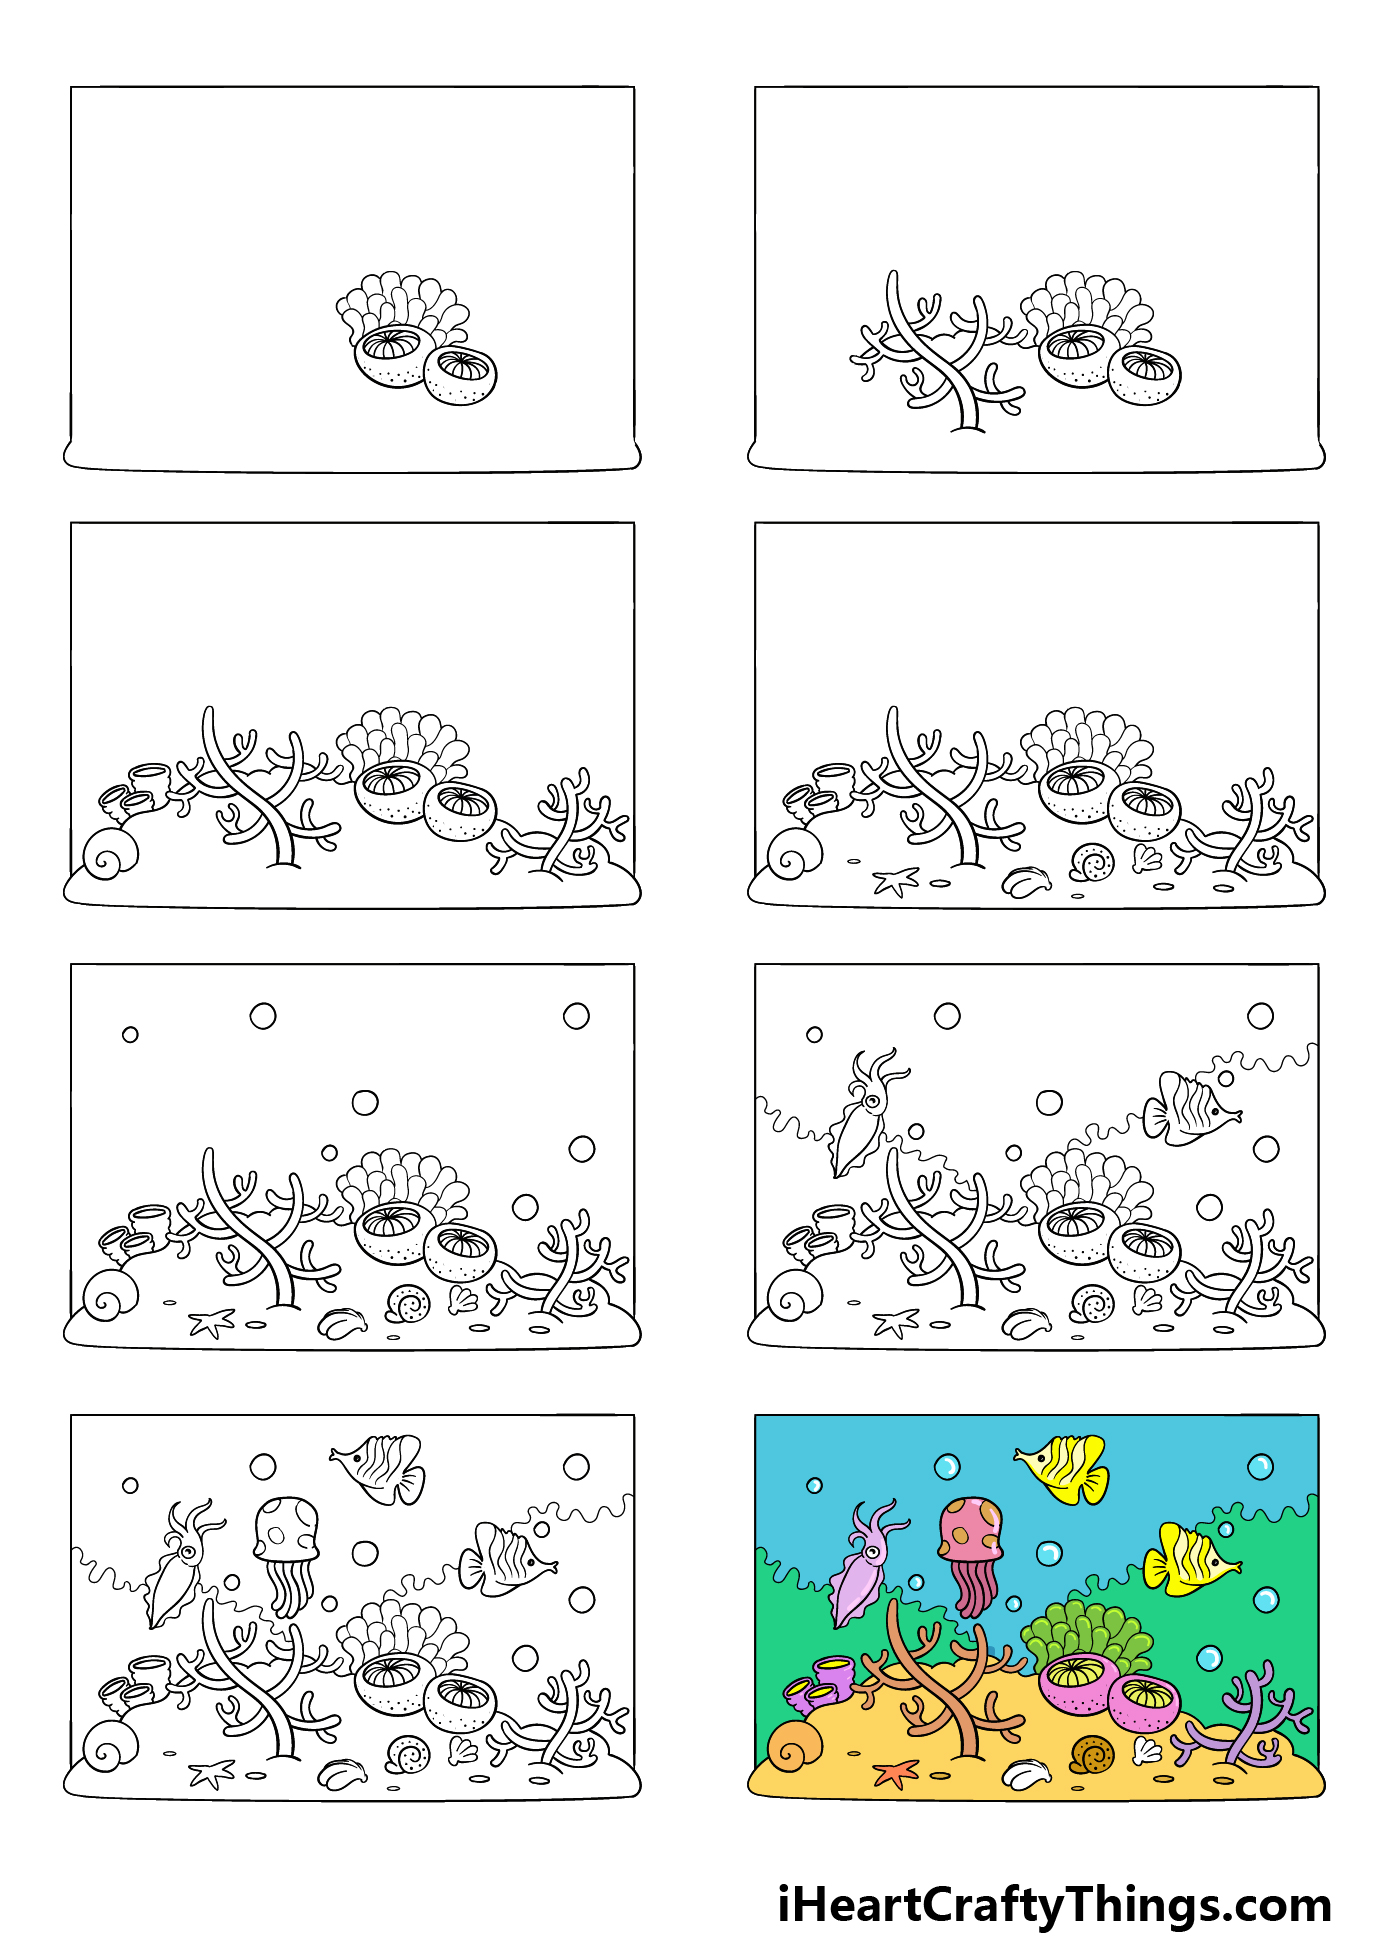 How to Draw A Cartoon Ocean in 8 steps